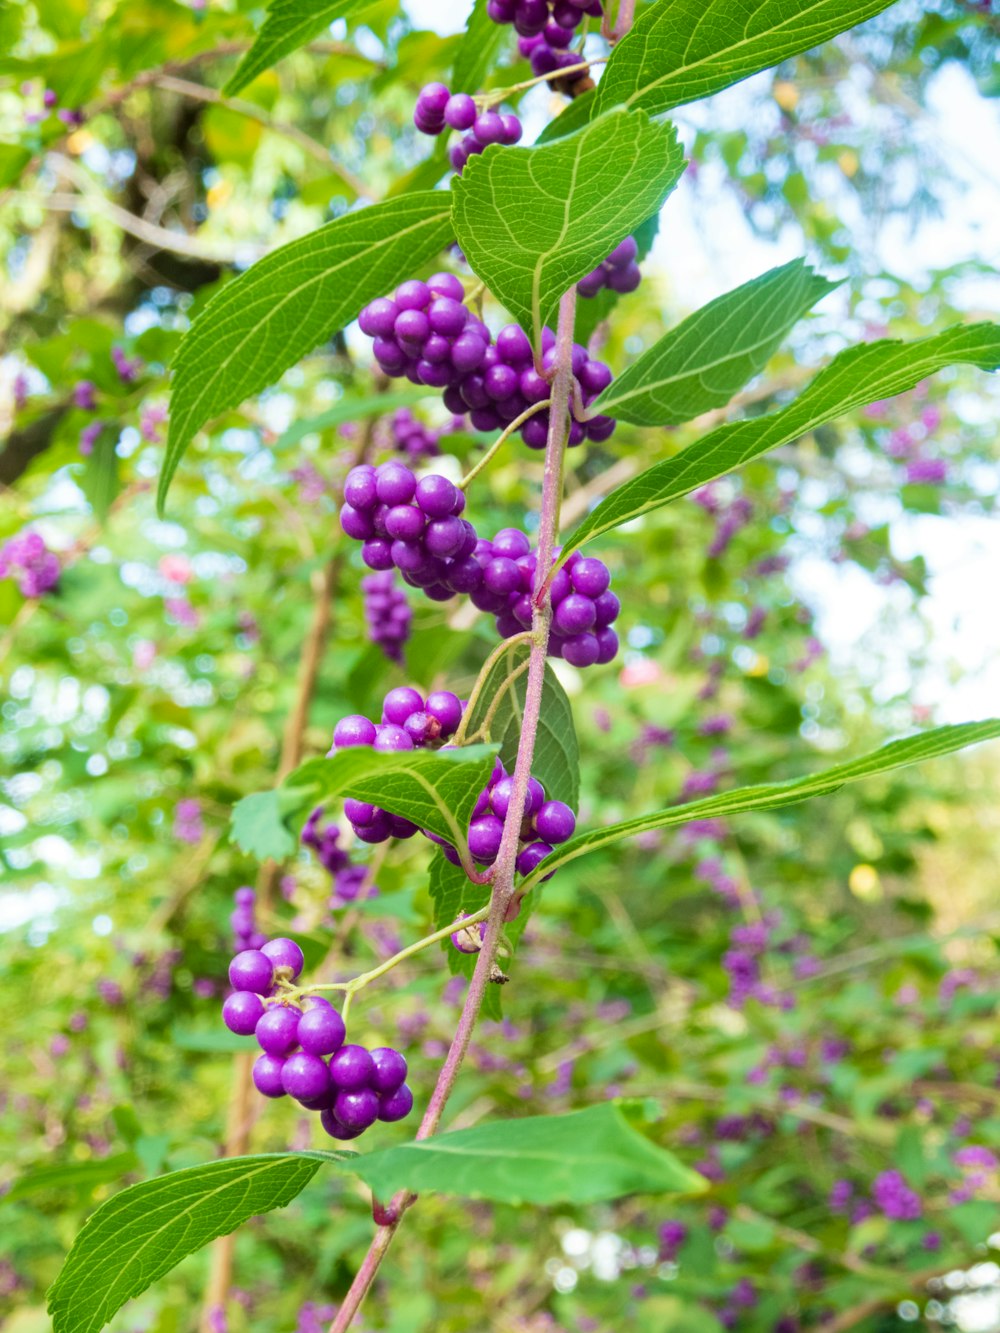 a close-up of some berries